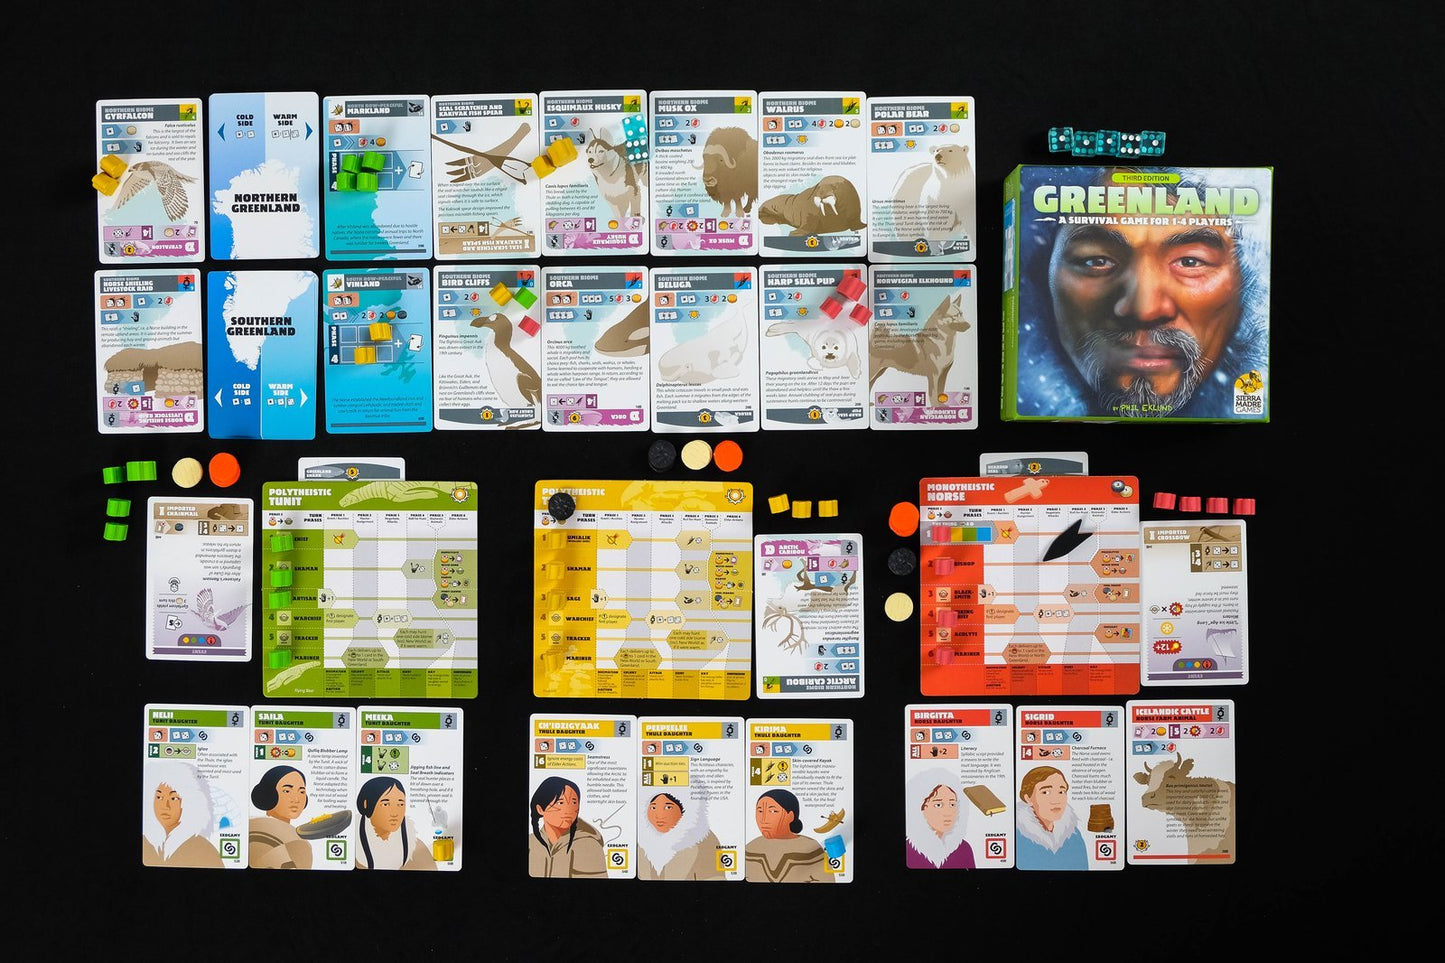 Greenland board game (3rd edition) - Organized view of the different game play pieces, cards, placards, tokens, tribesmen, and custom meeples